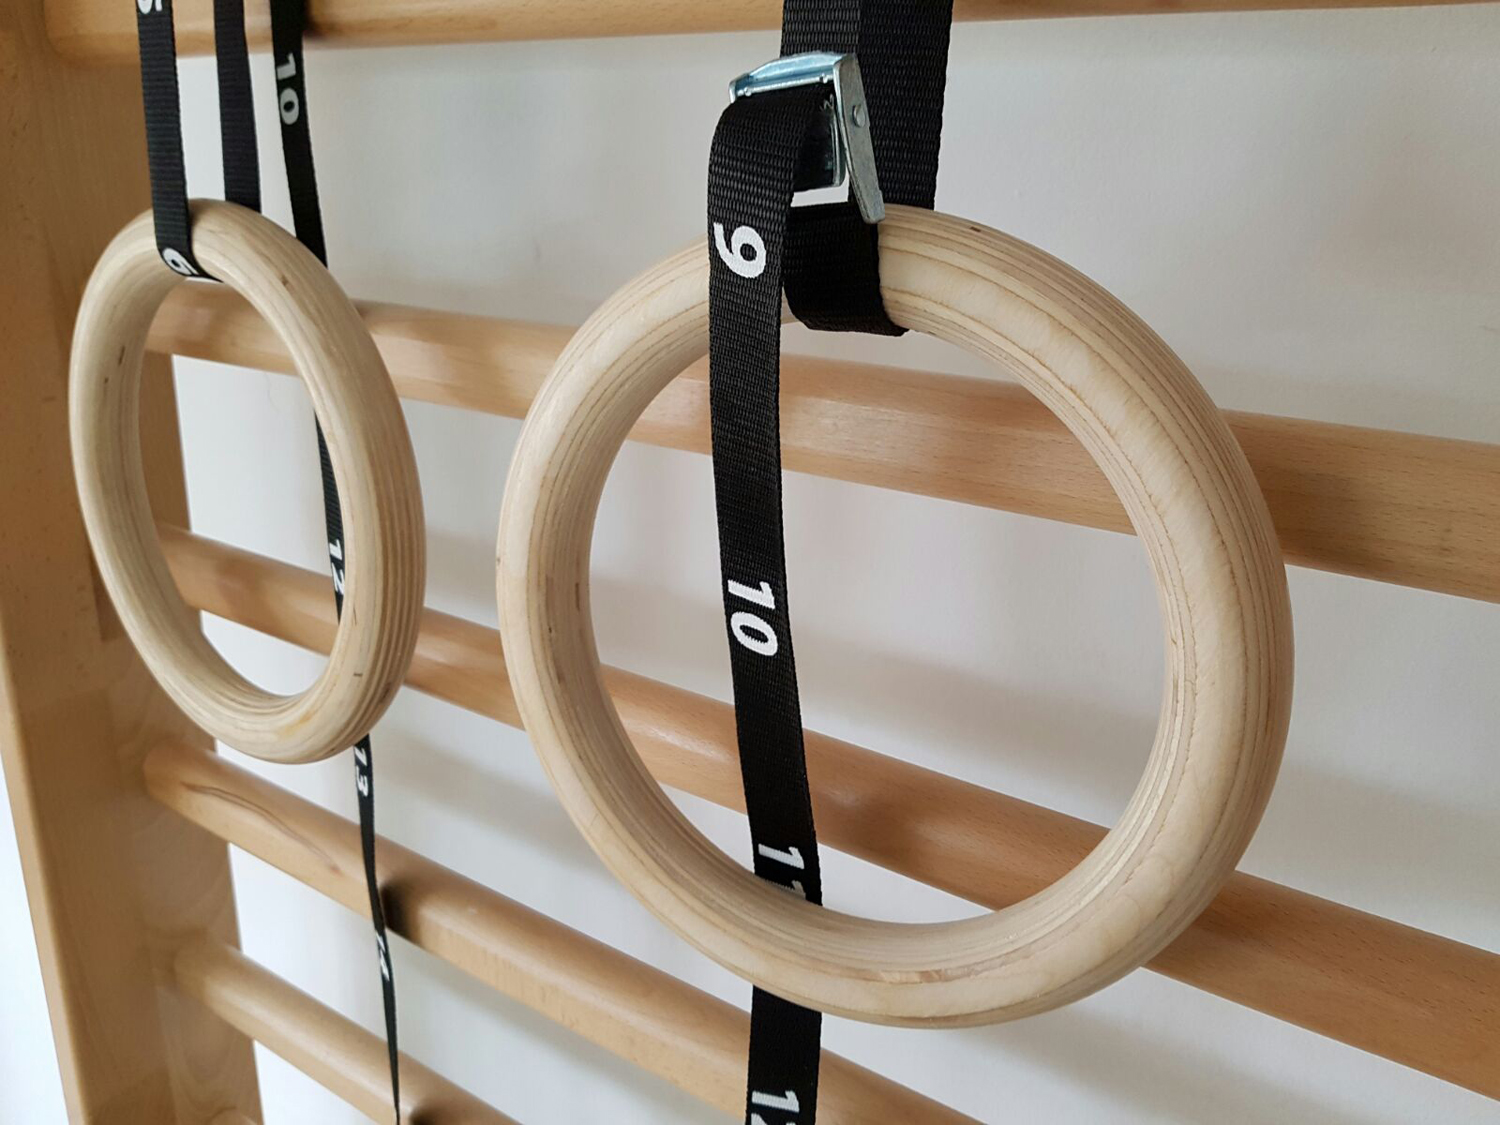 Gymnastic Rings Made of Plywood